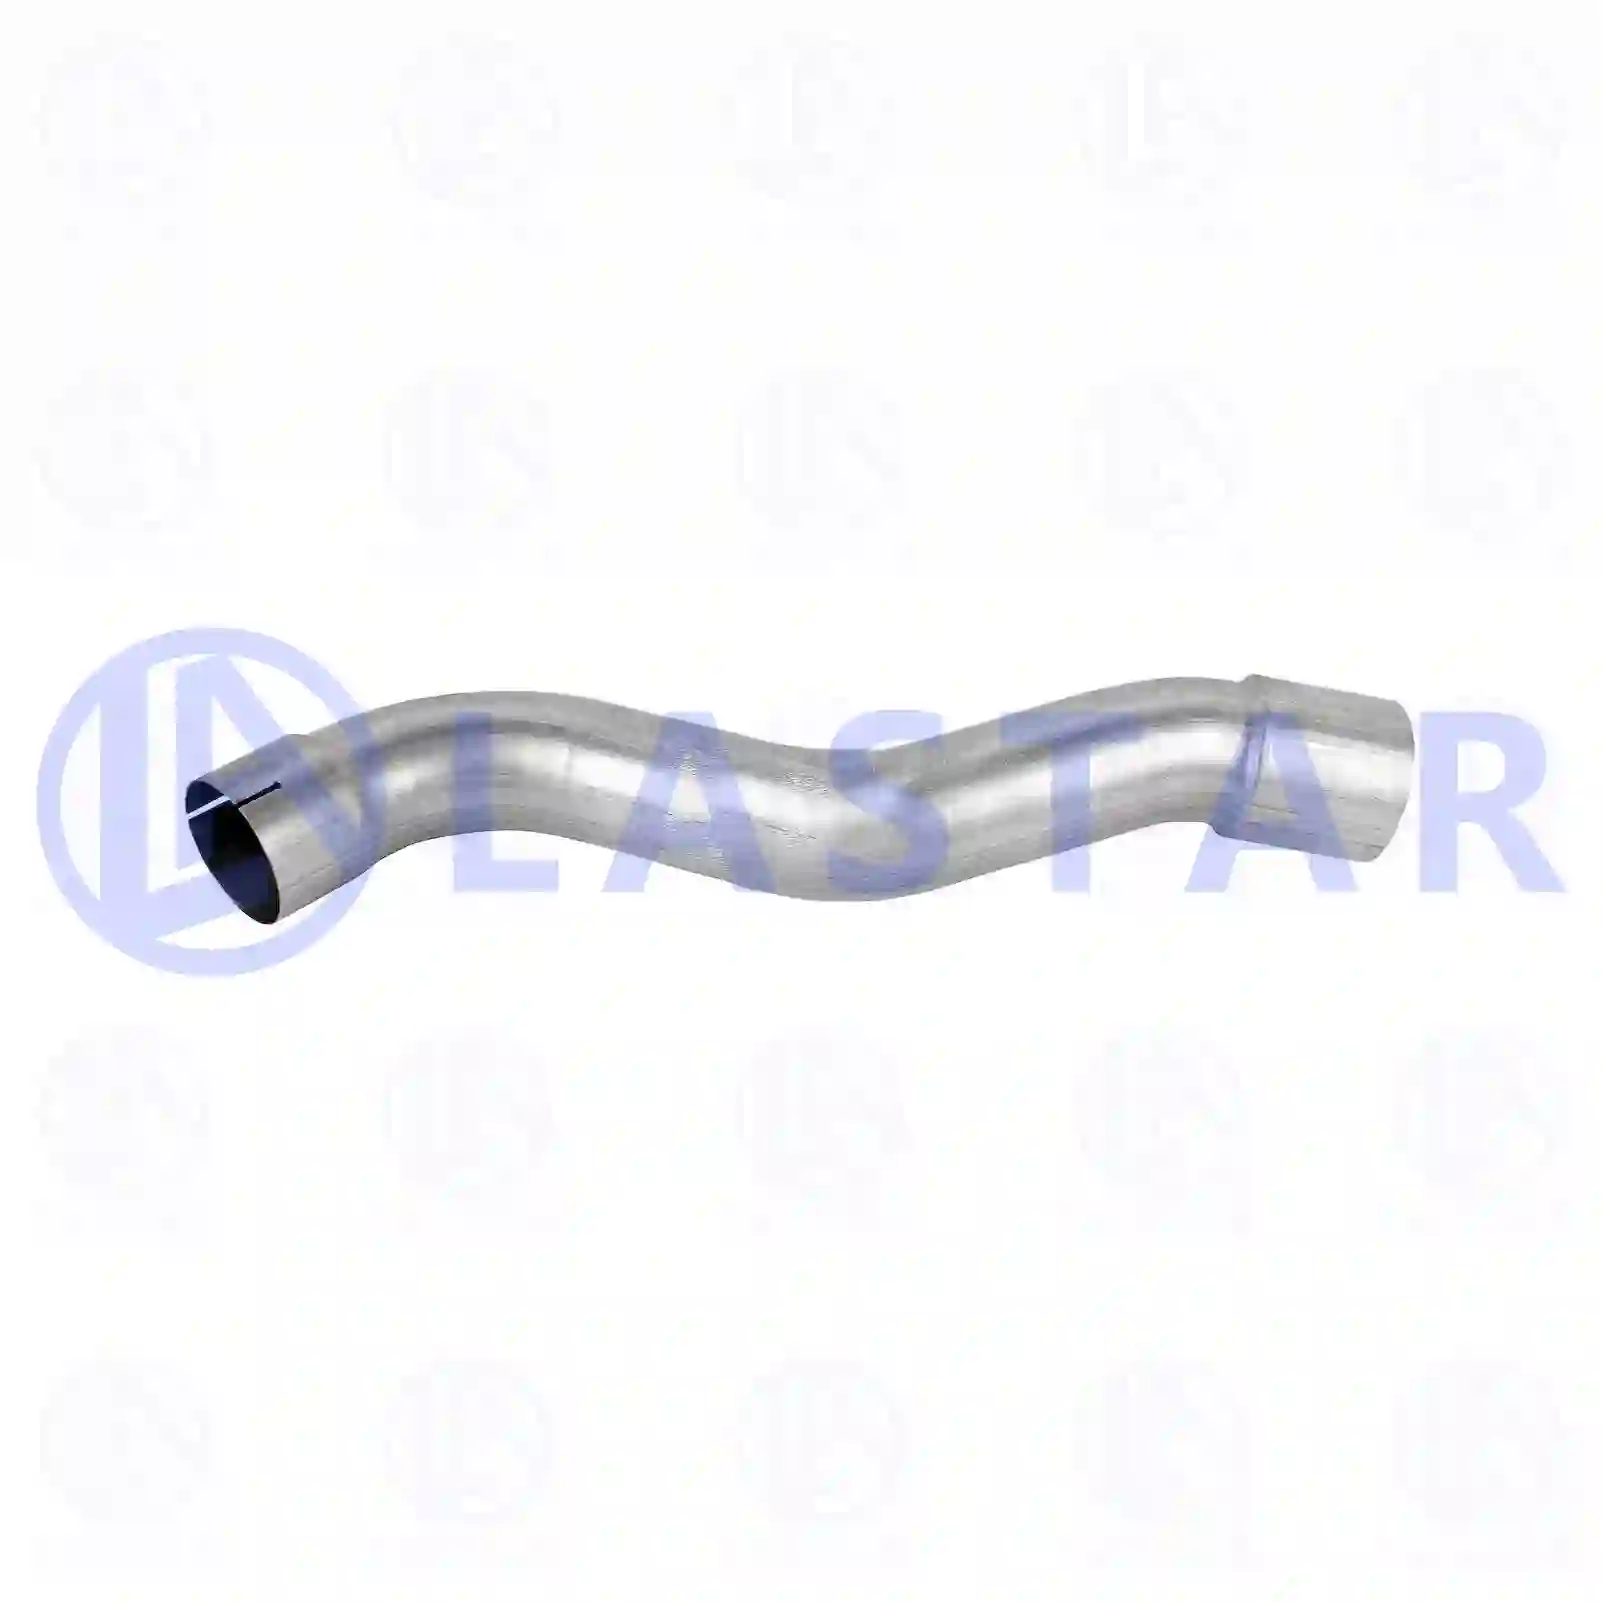 Exhaust pipe, 77706364, 9404920401, 94049 ||  77706364 Lastar Spare Part | Truck Spare Parts, Auotomotive Spare Parts Exhaust pipe, 77706364, 9404920401, 94049 ||  77706364 Lastar Spare Part | Truck Spare Parts, Auotomotive Spare Parts